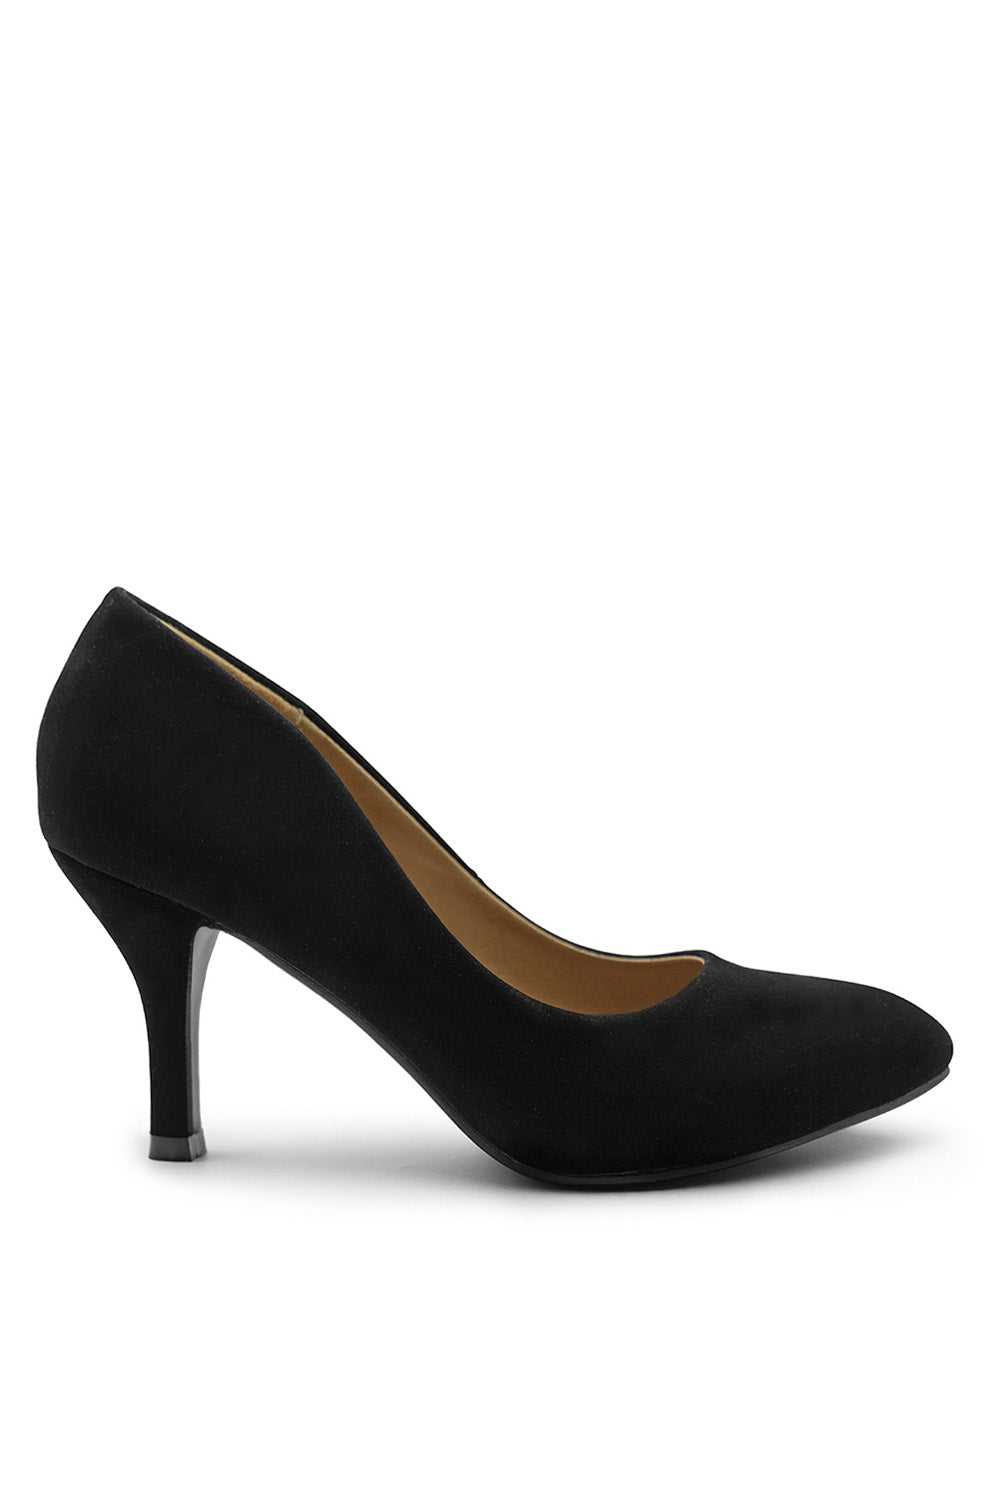 Calla | Ava | Black Suede | Kitten heeled dress shoes for bunions